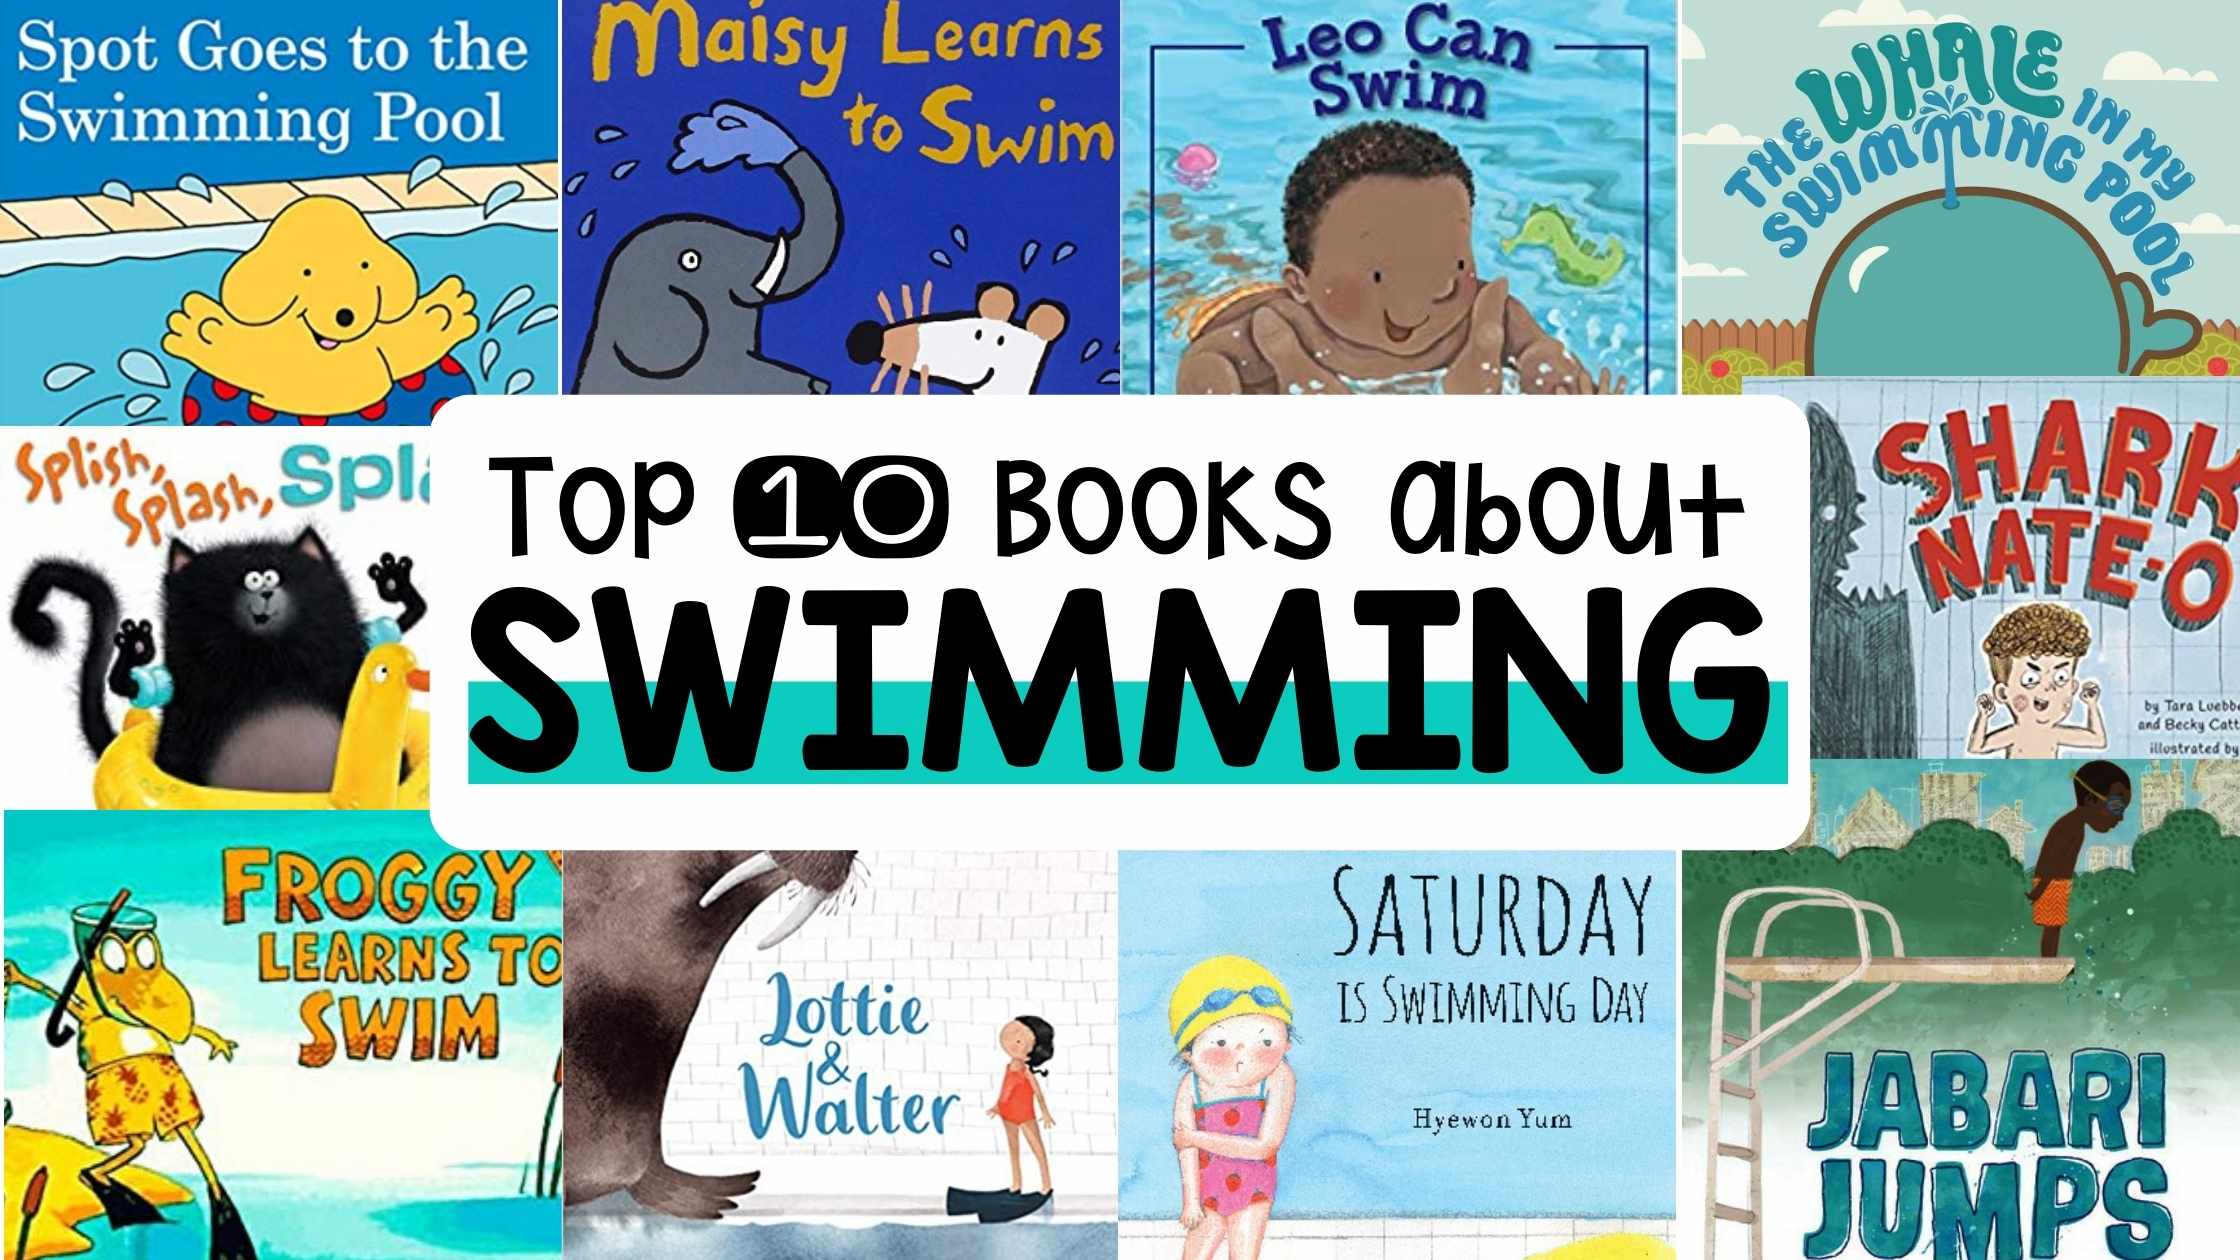 Top 10 Books about Swimming